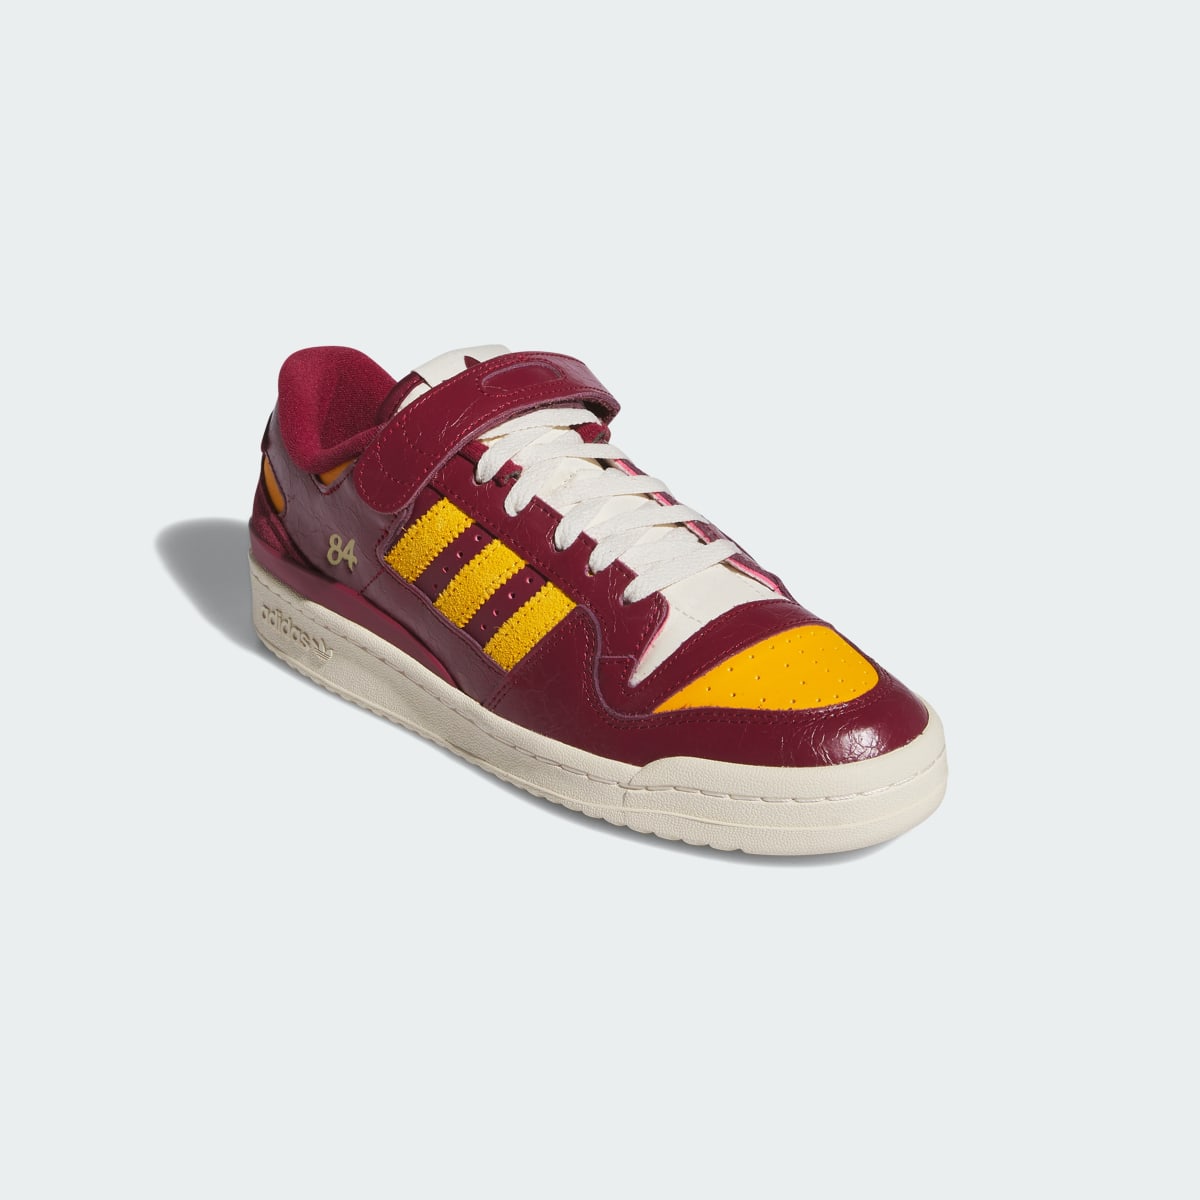 Adidas Forum 84 Low Shoes. 5